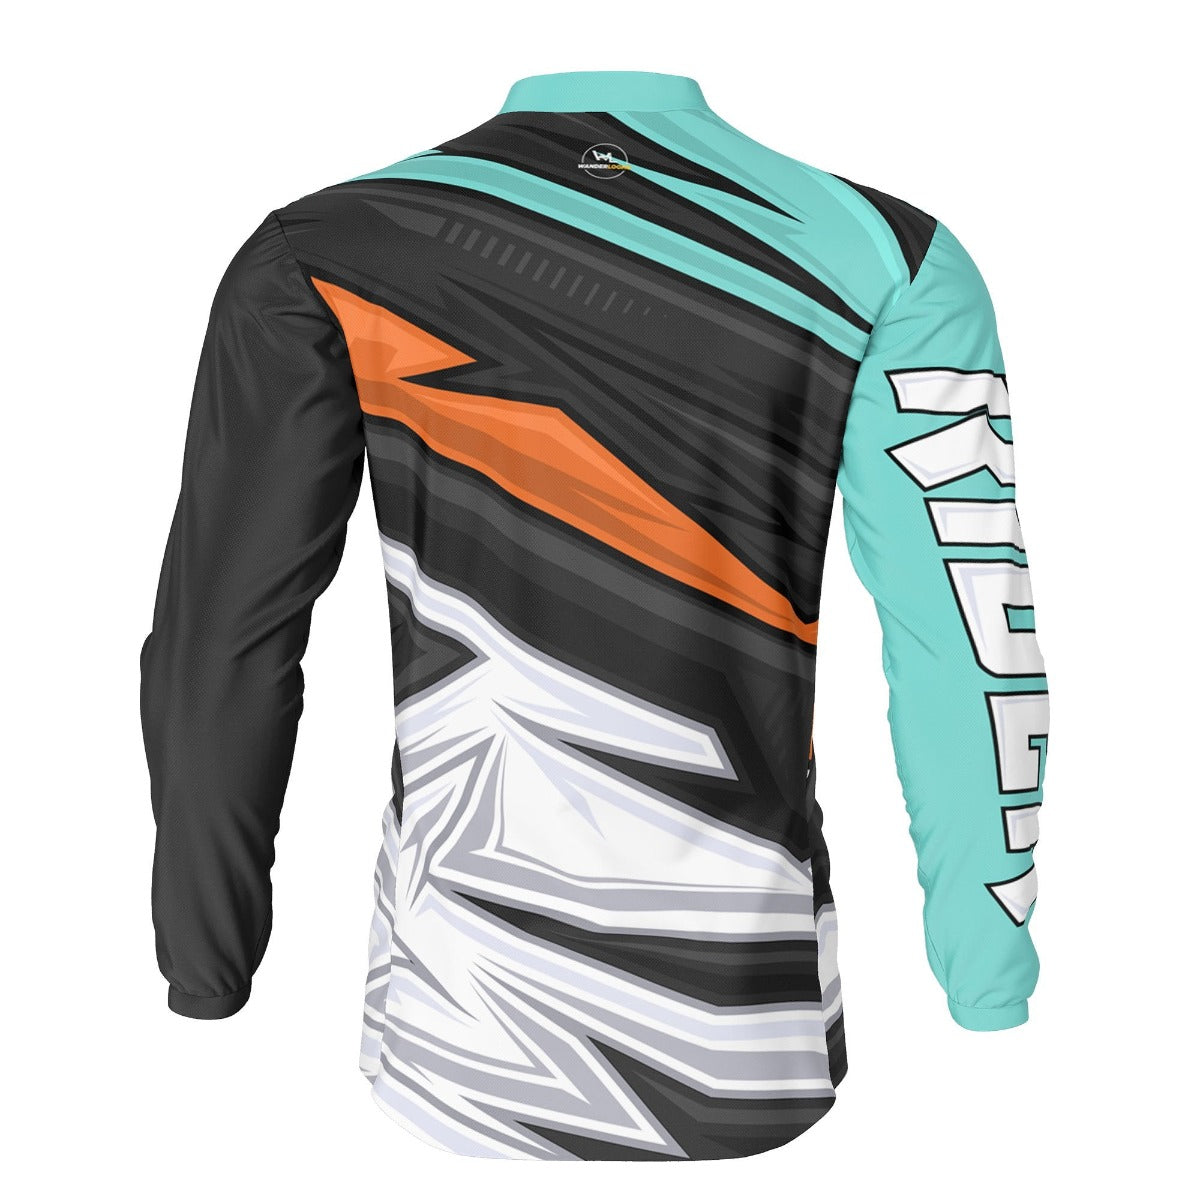 Absolute Rider Jersey 7